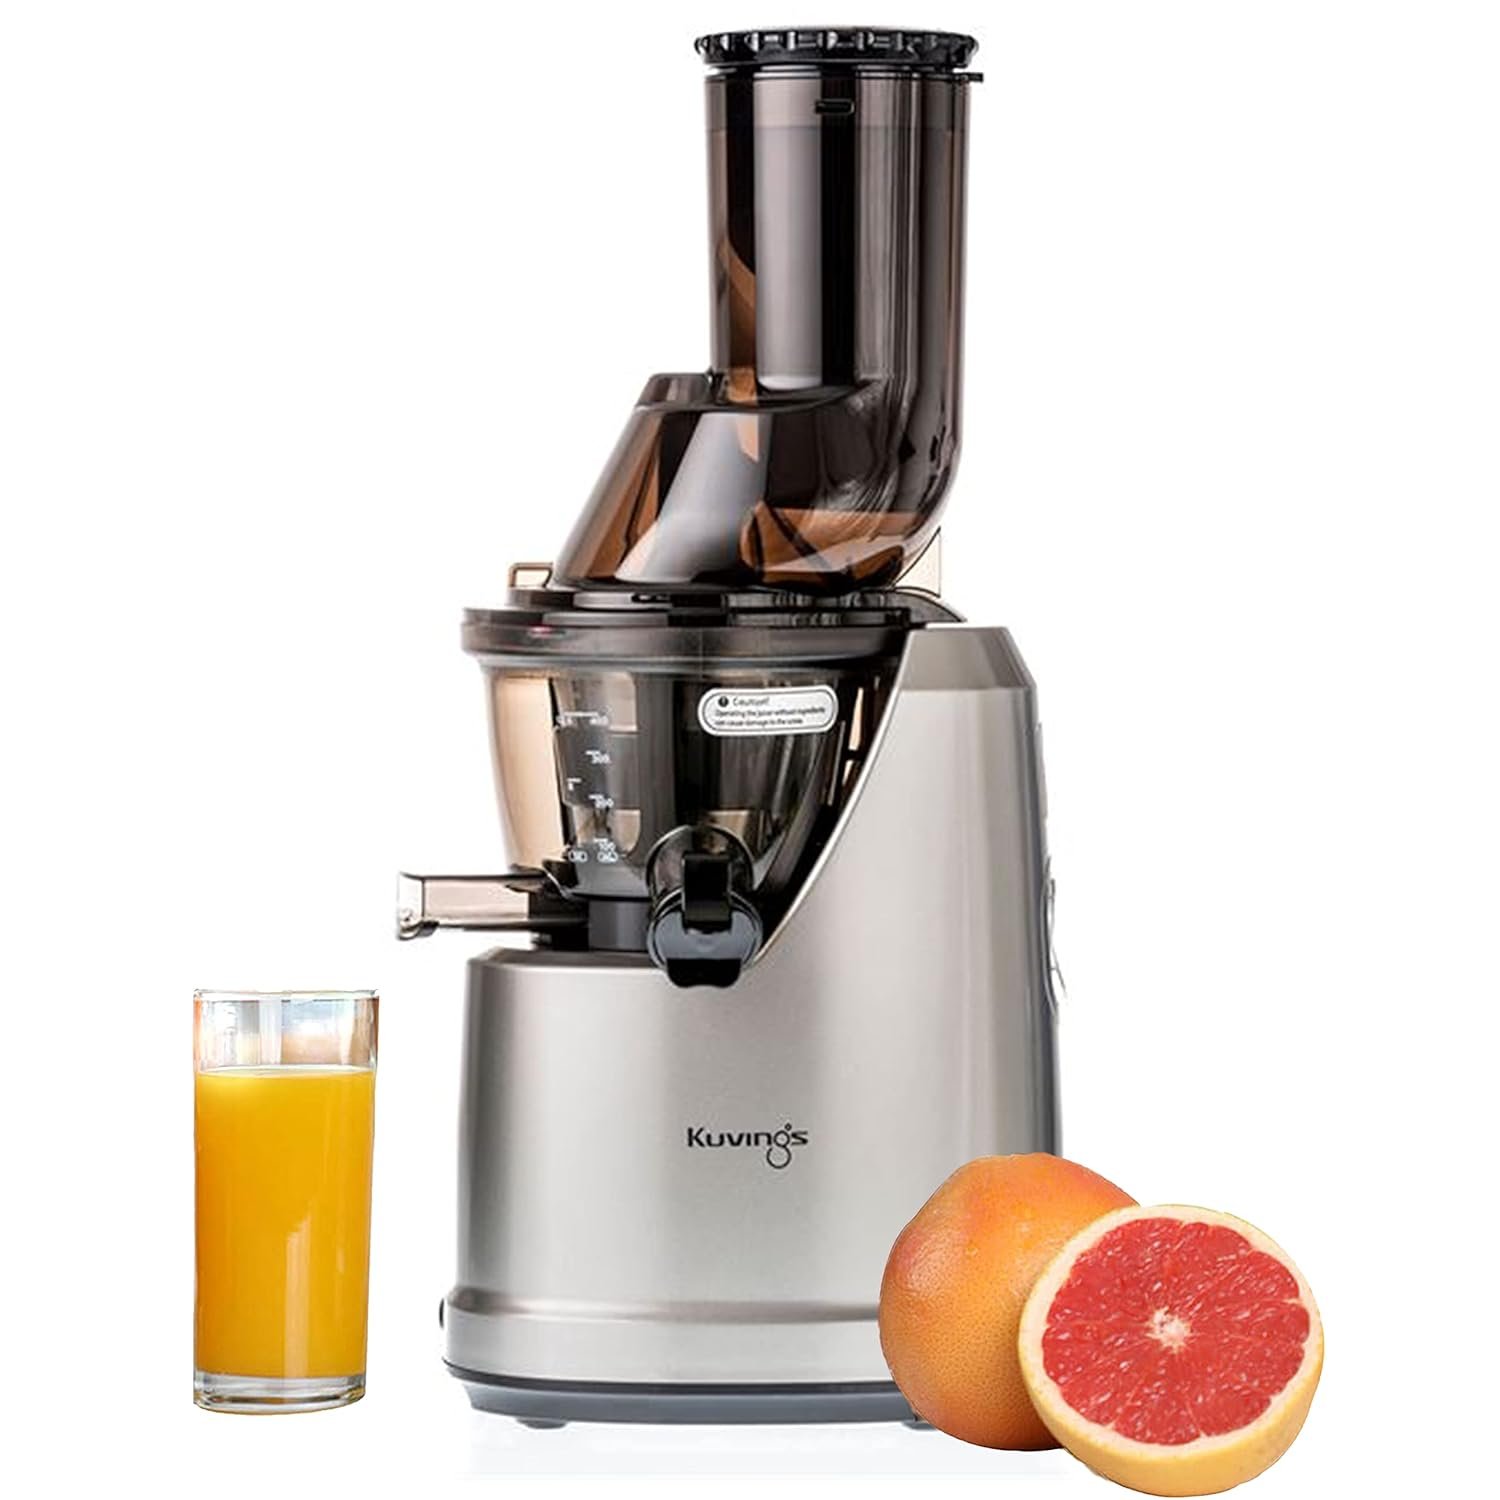 Kuvings B1700 Dark Silver Cold Press Whole Slow Juicer, Patented JMCS Technology for More Juice, All-in-1 Fruit & Vegetable Juicer, 12 Years Manufacturer Warranty, Home Service Across India, 240W